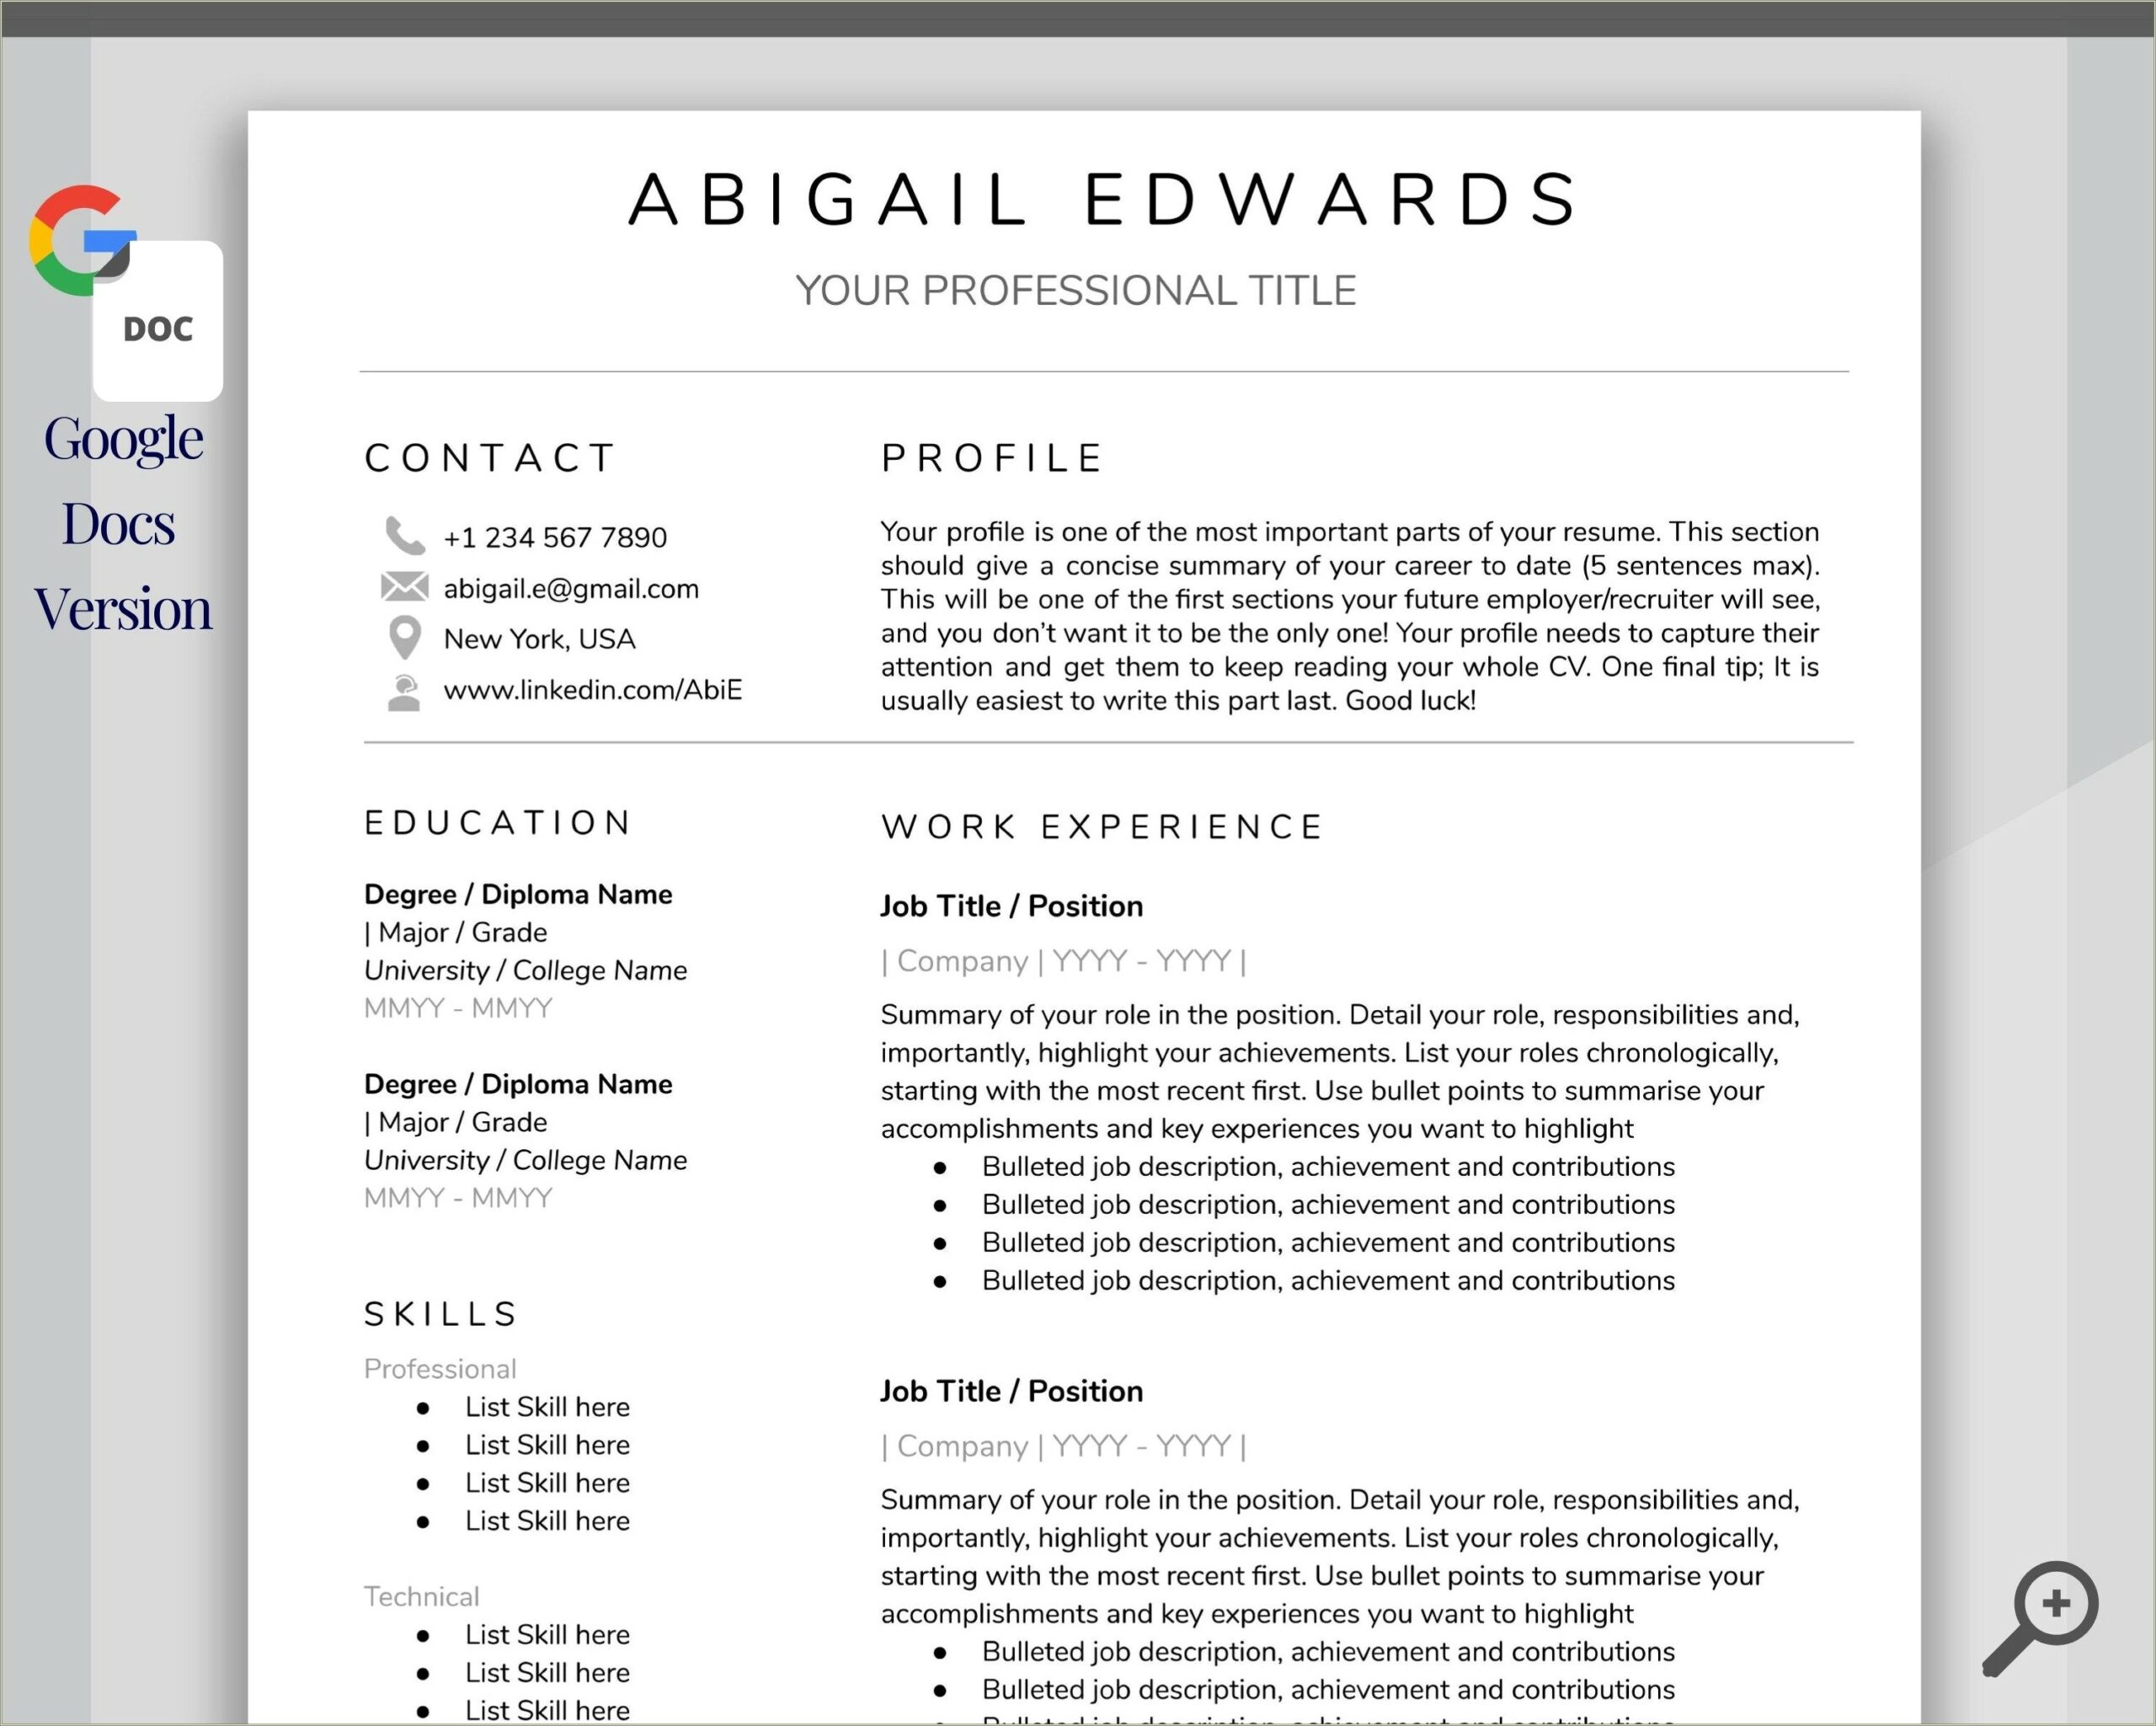 Get A Resume Template For Docs